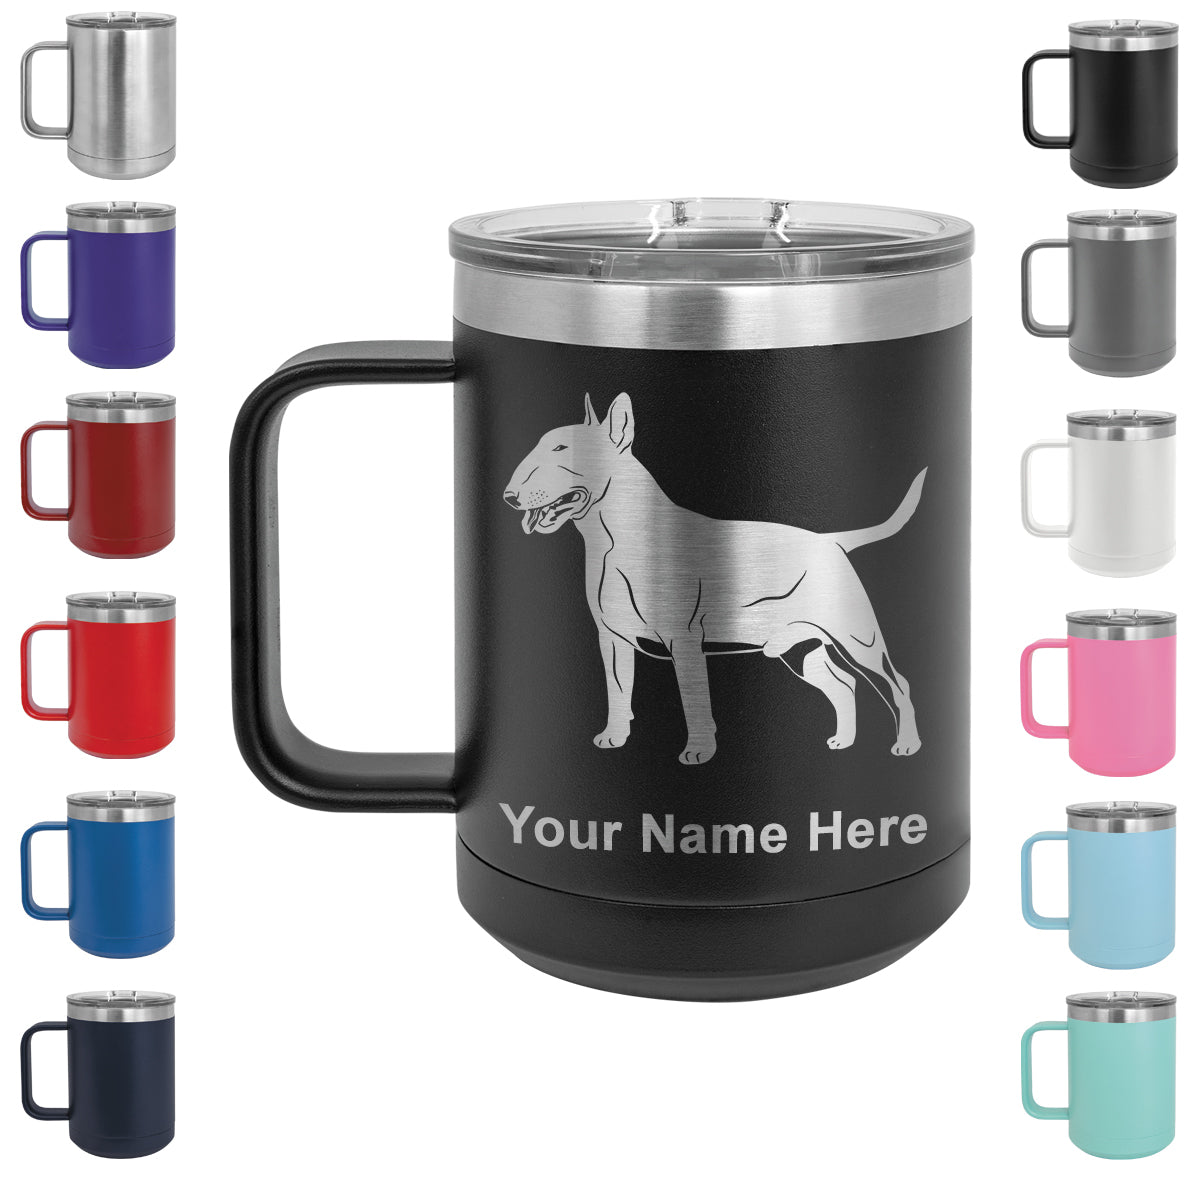 15oz Vacuum Insulated Coffee Mug, Bull Terrier Dog, Personalized Engraving Included